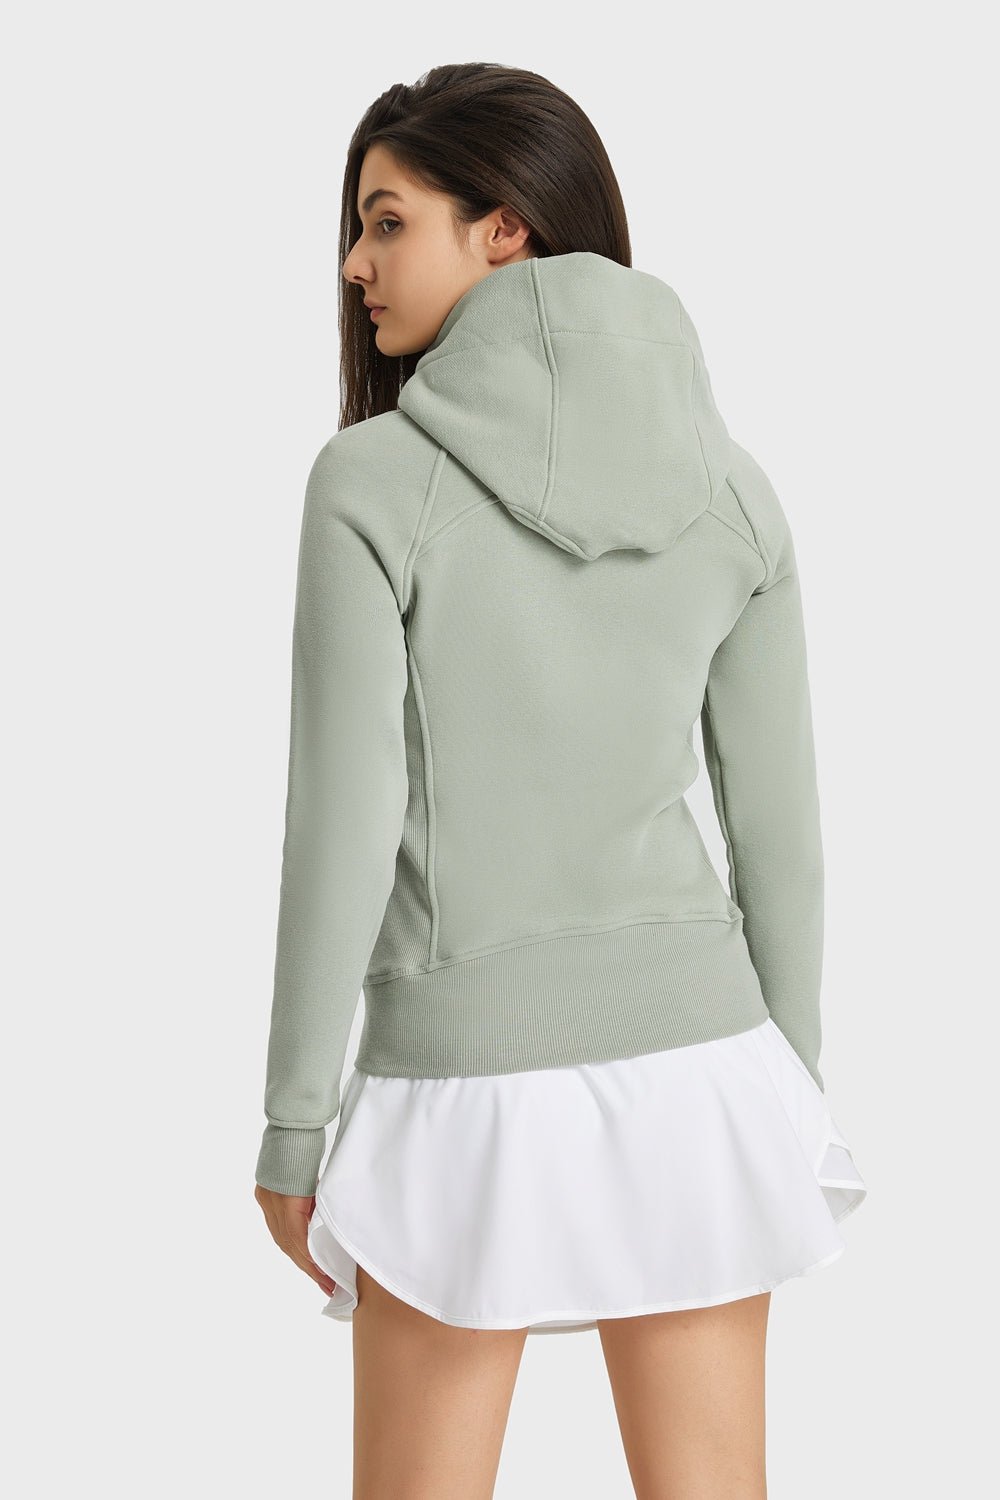 Zip Up Seam Detail Hooded Sports Jacket  | KIKI COUTURE-Women's Clothing, Designer Fashions, Shoes, Bags